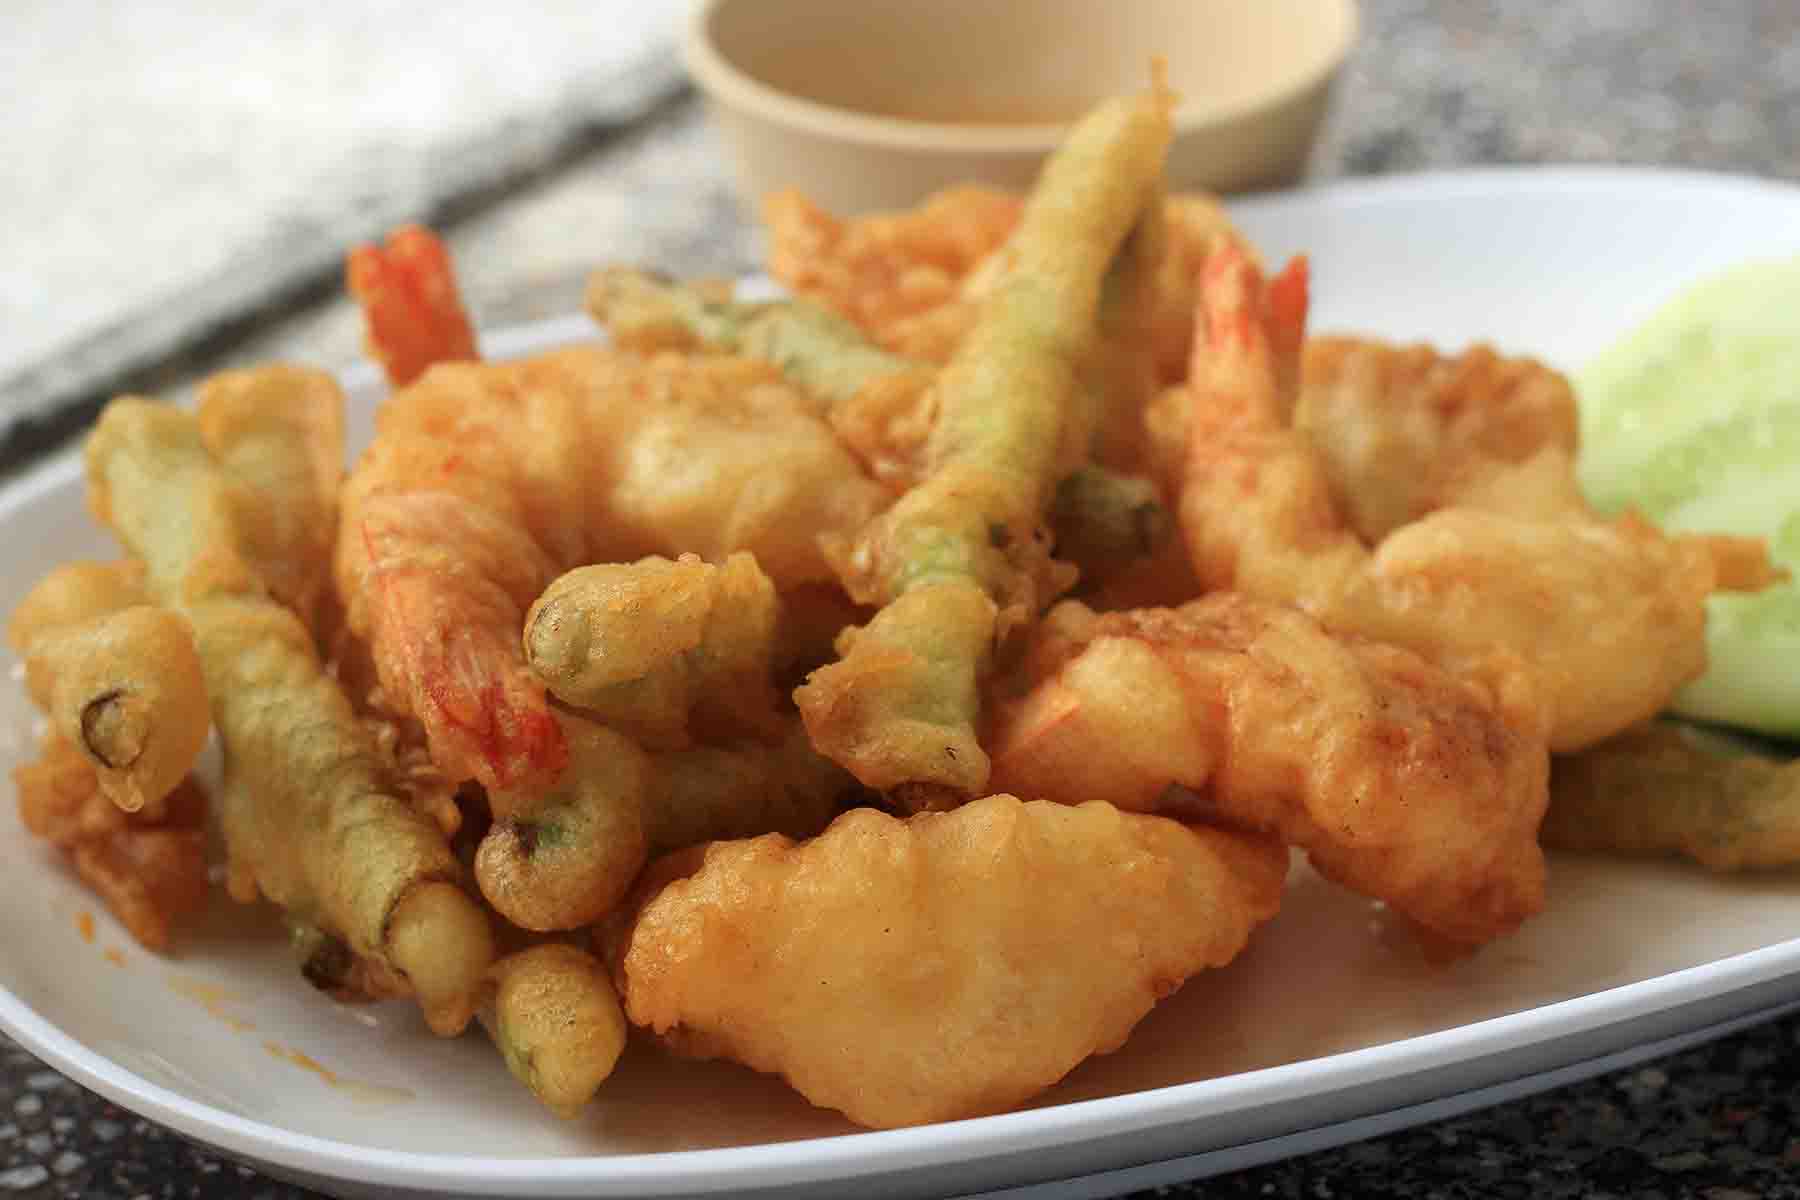 Fried seafood platter from a seafood restaurant